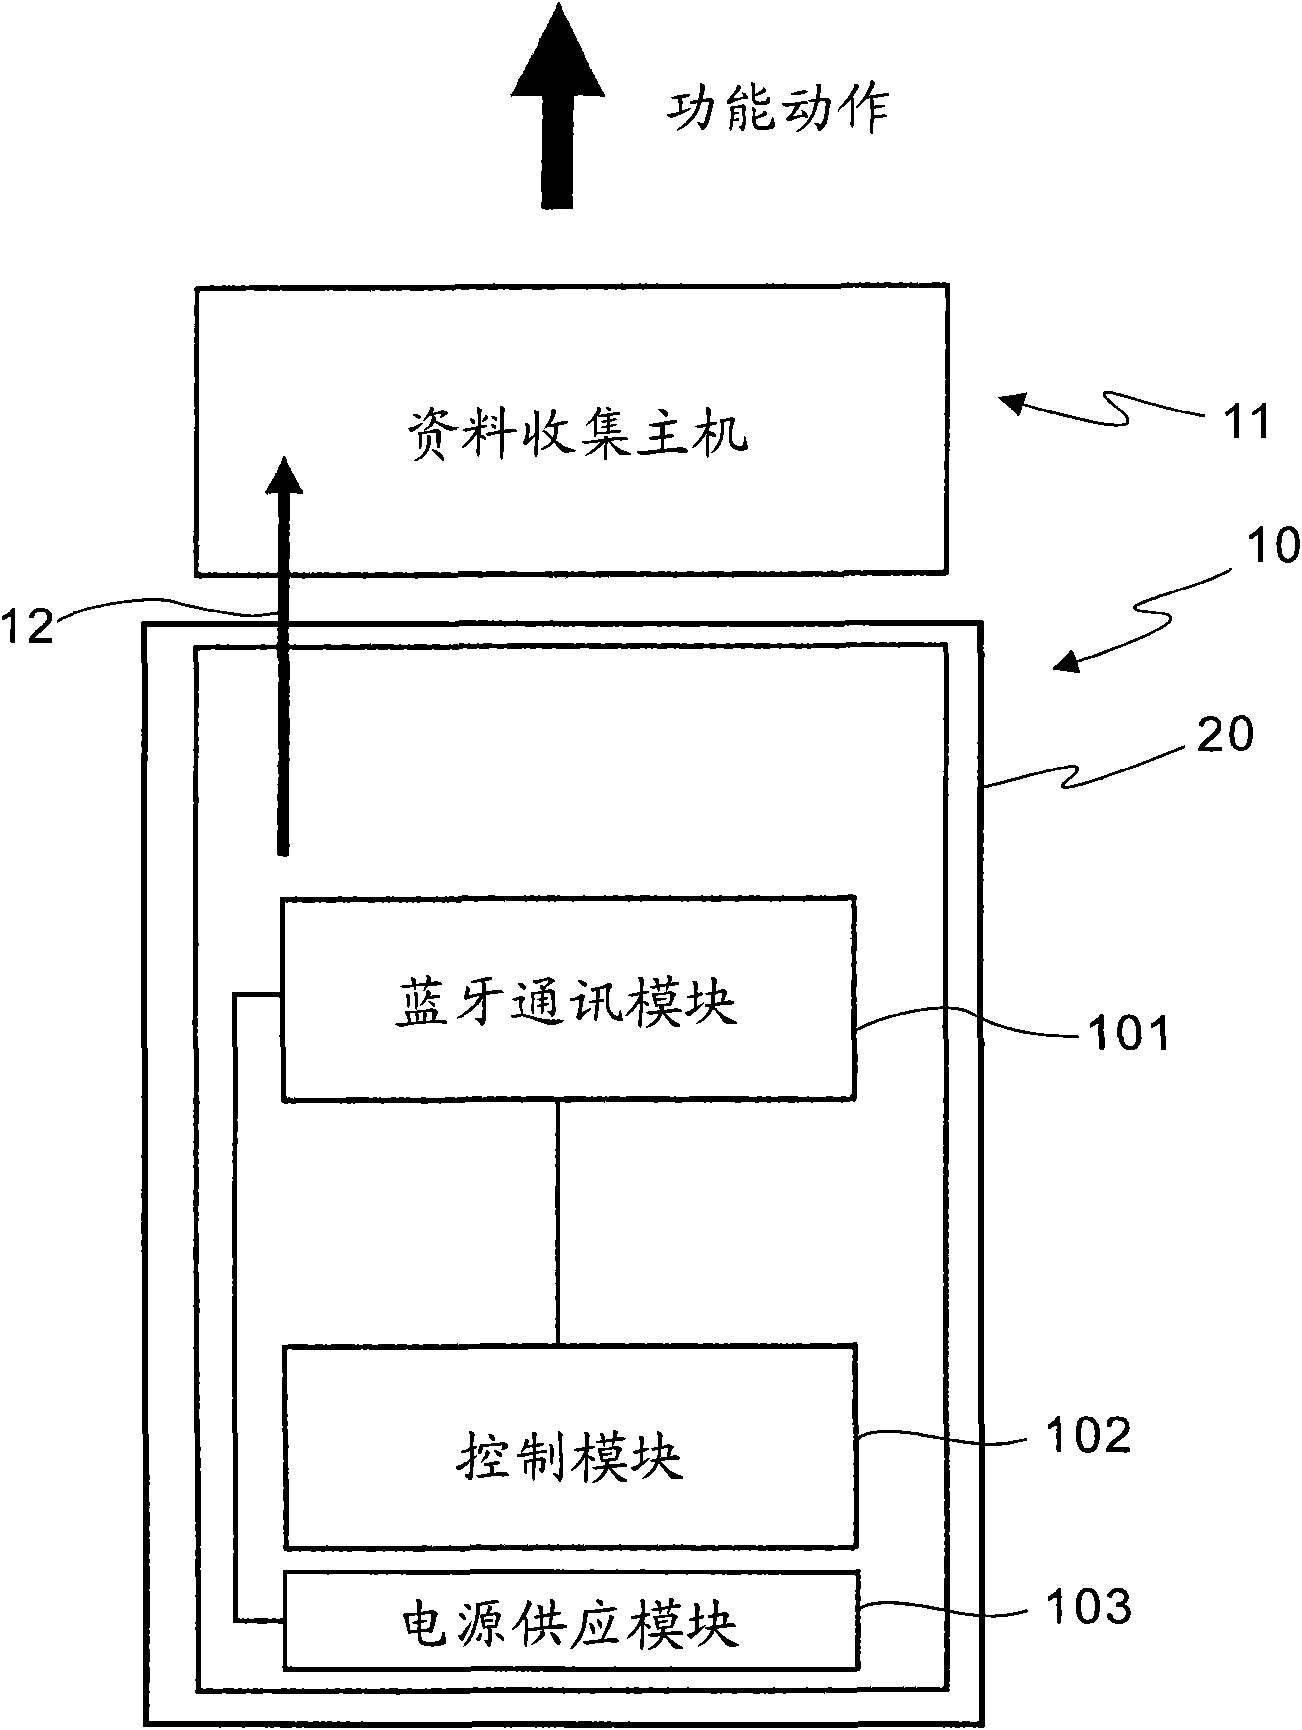 Trigger control device and method